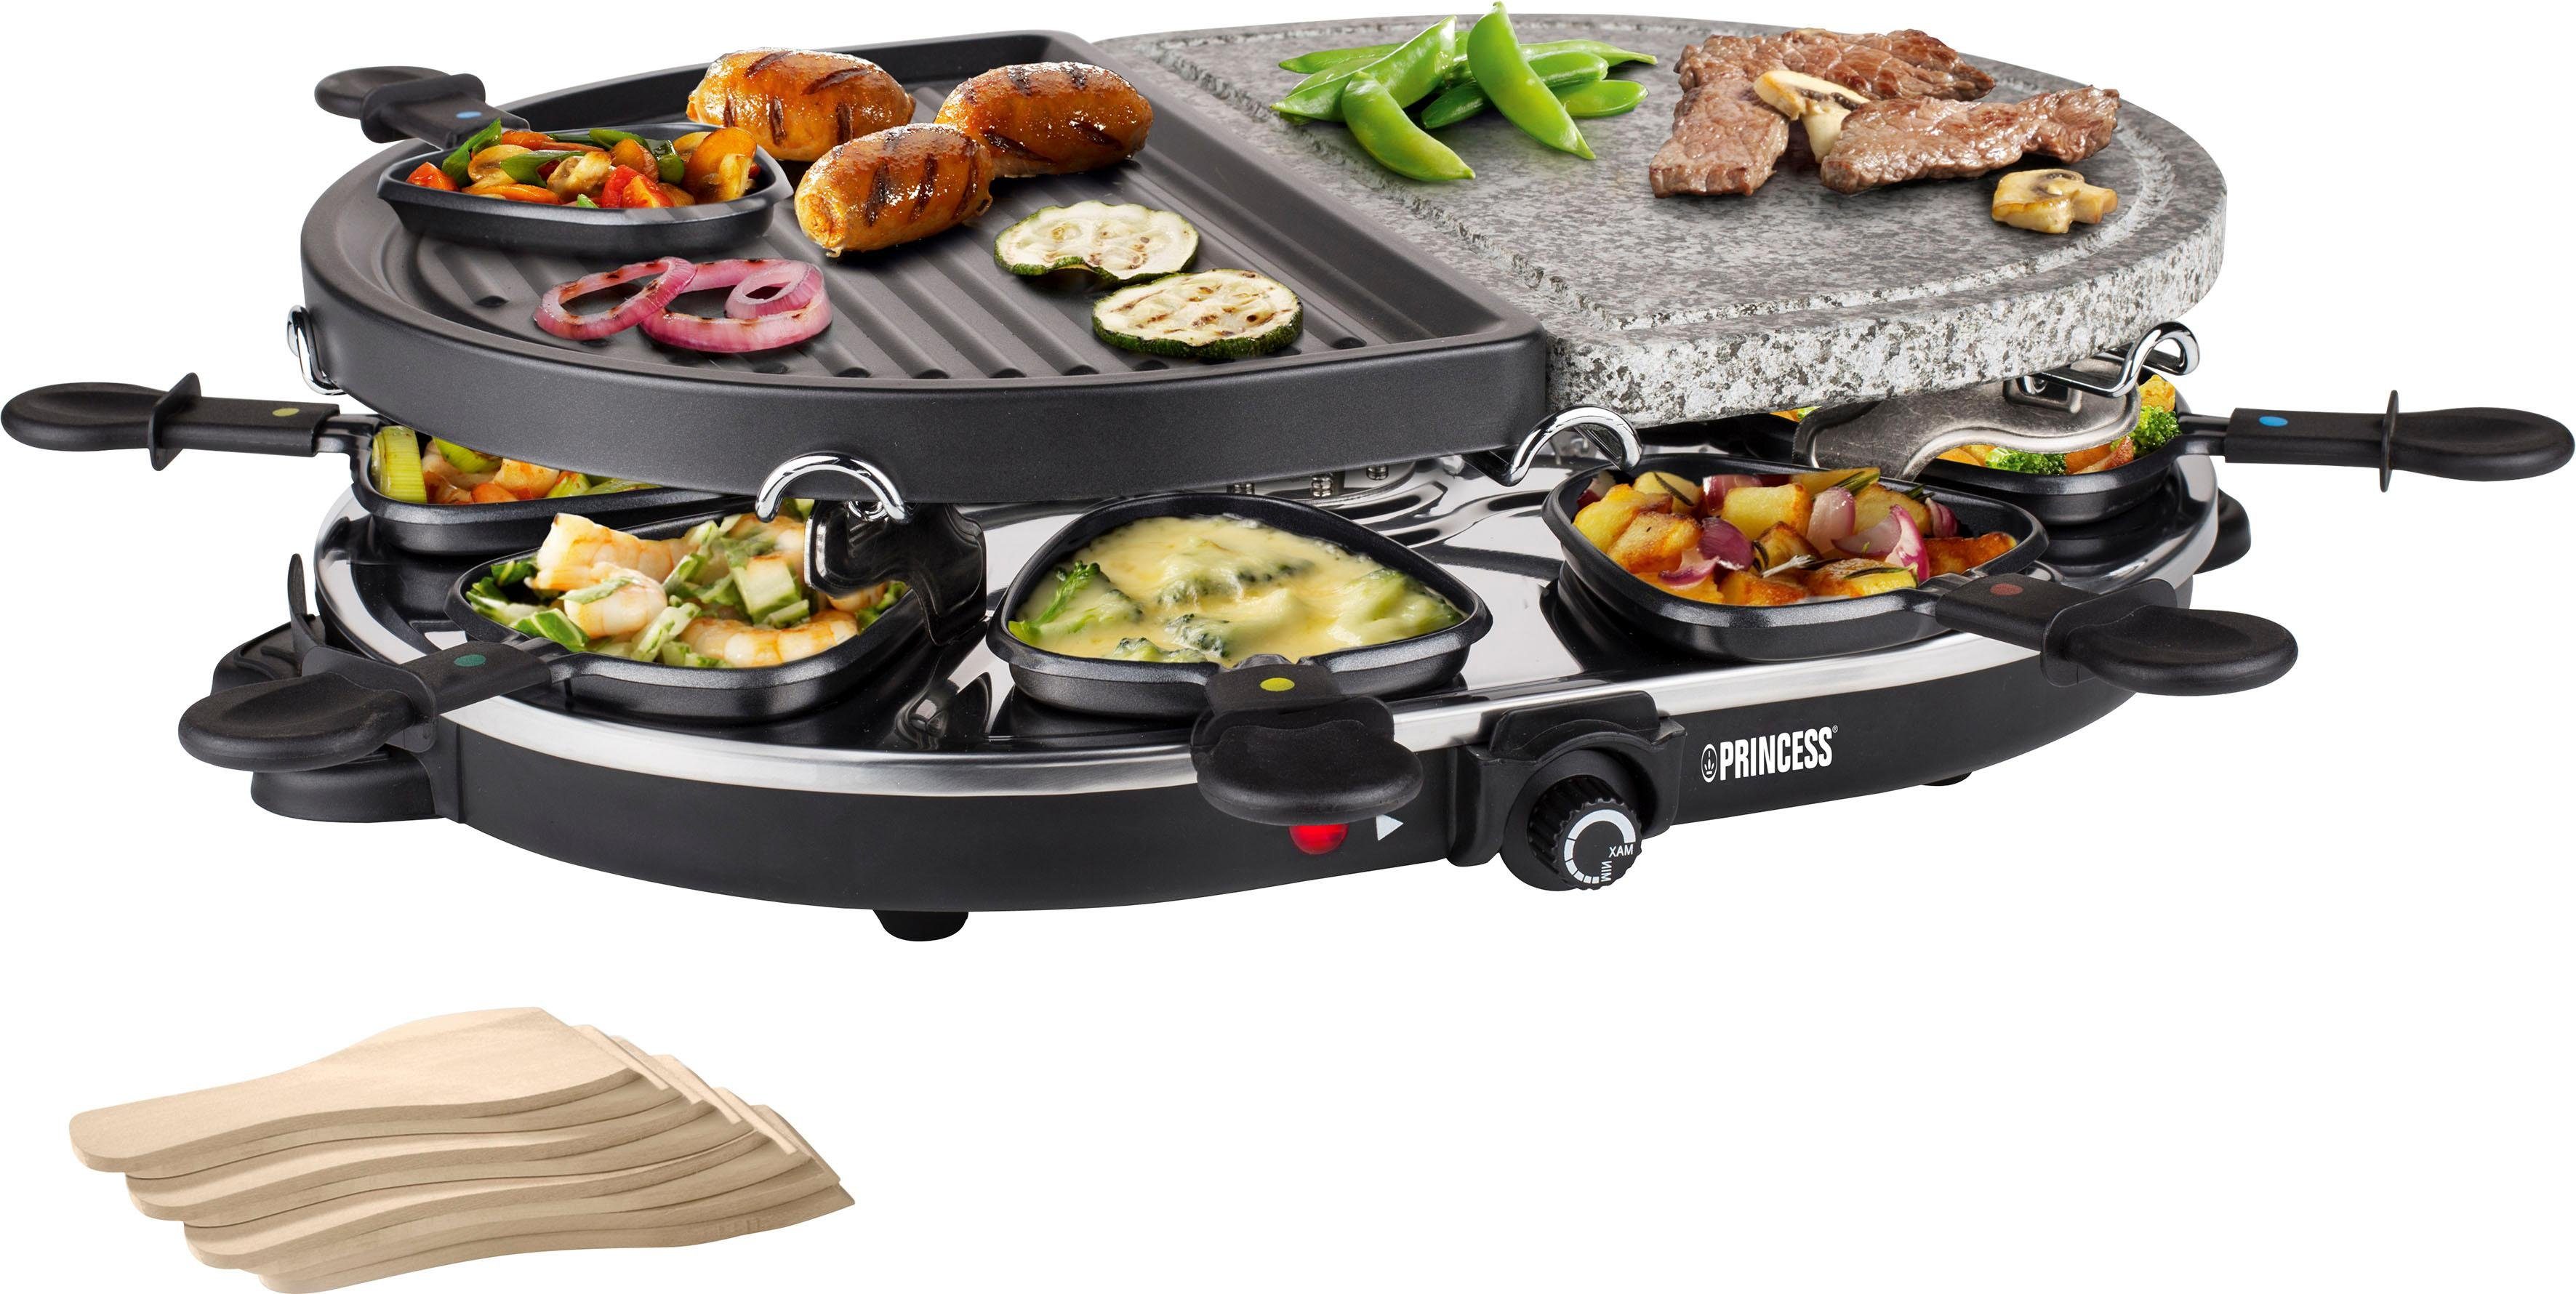 PRINCESS 162710, 8 Raclette 1200 8 & Oval Party Stone W - Raclettepfännchen, Grill